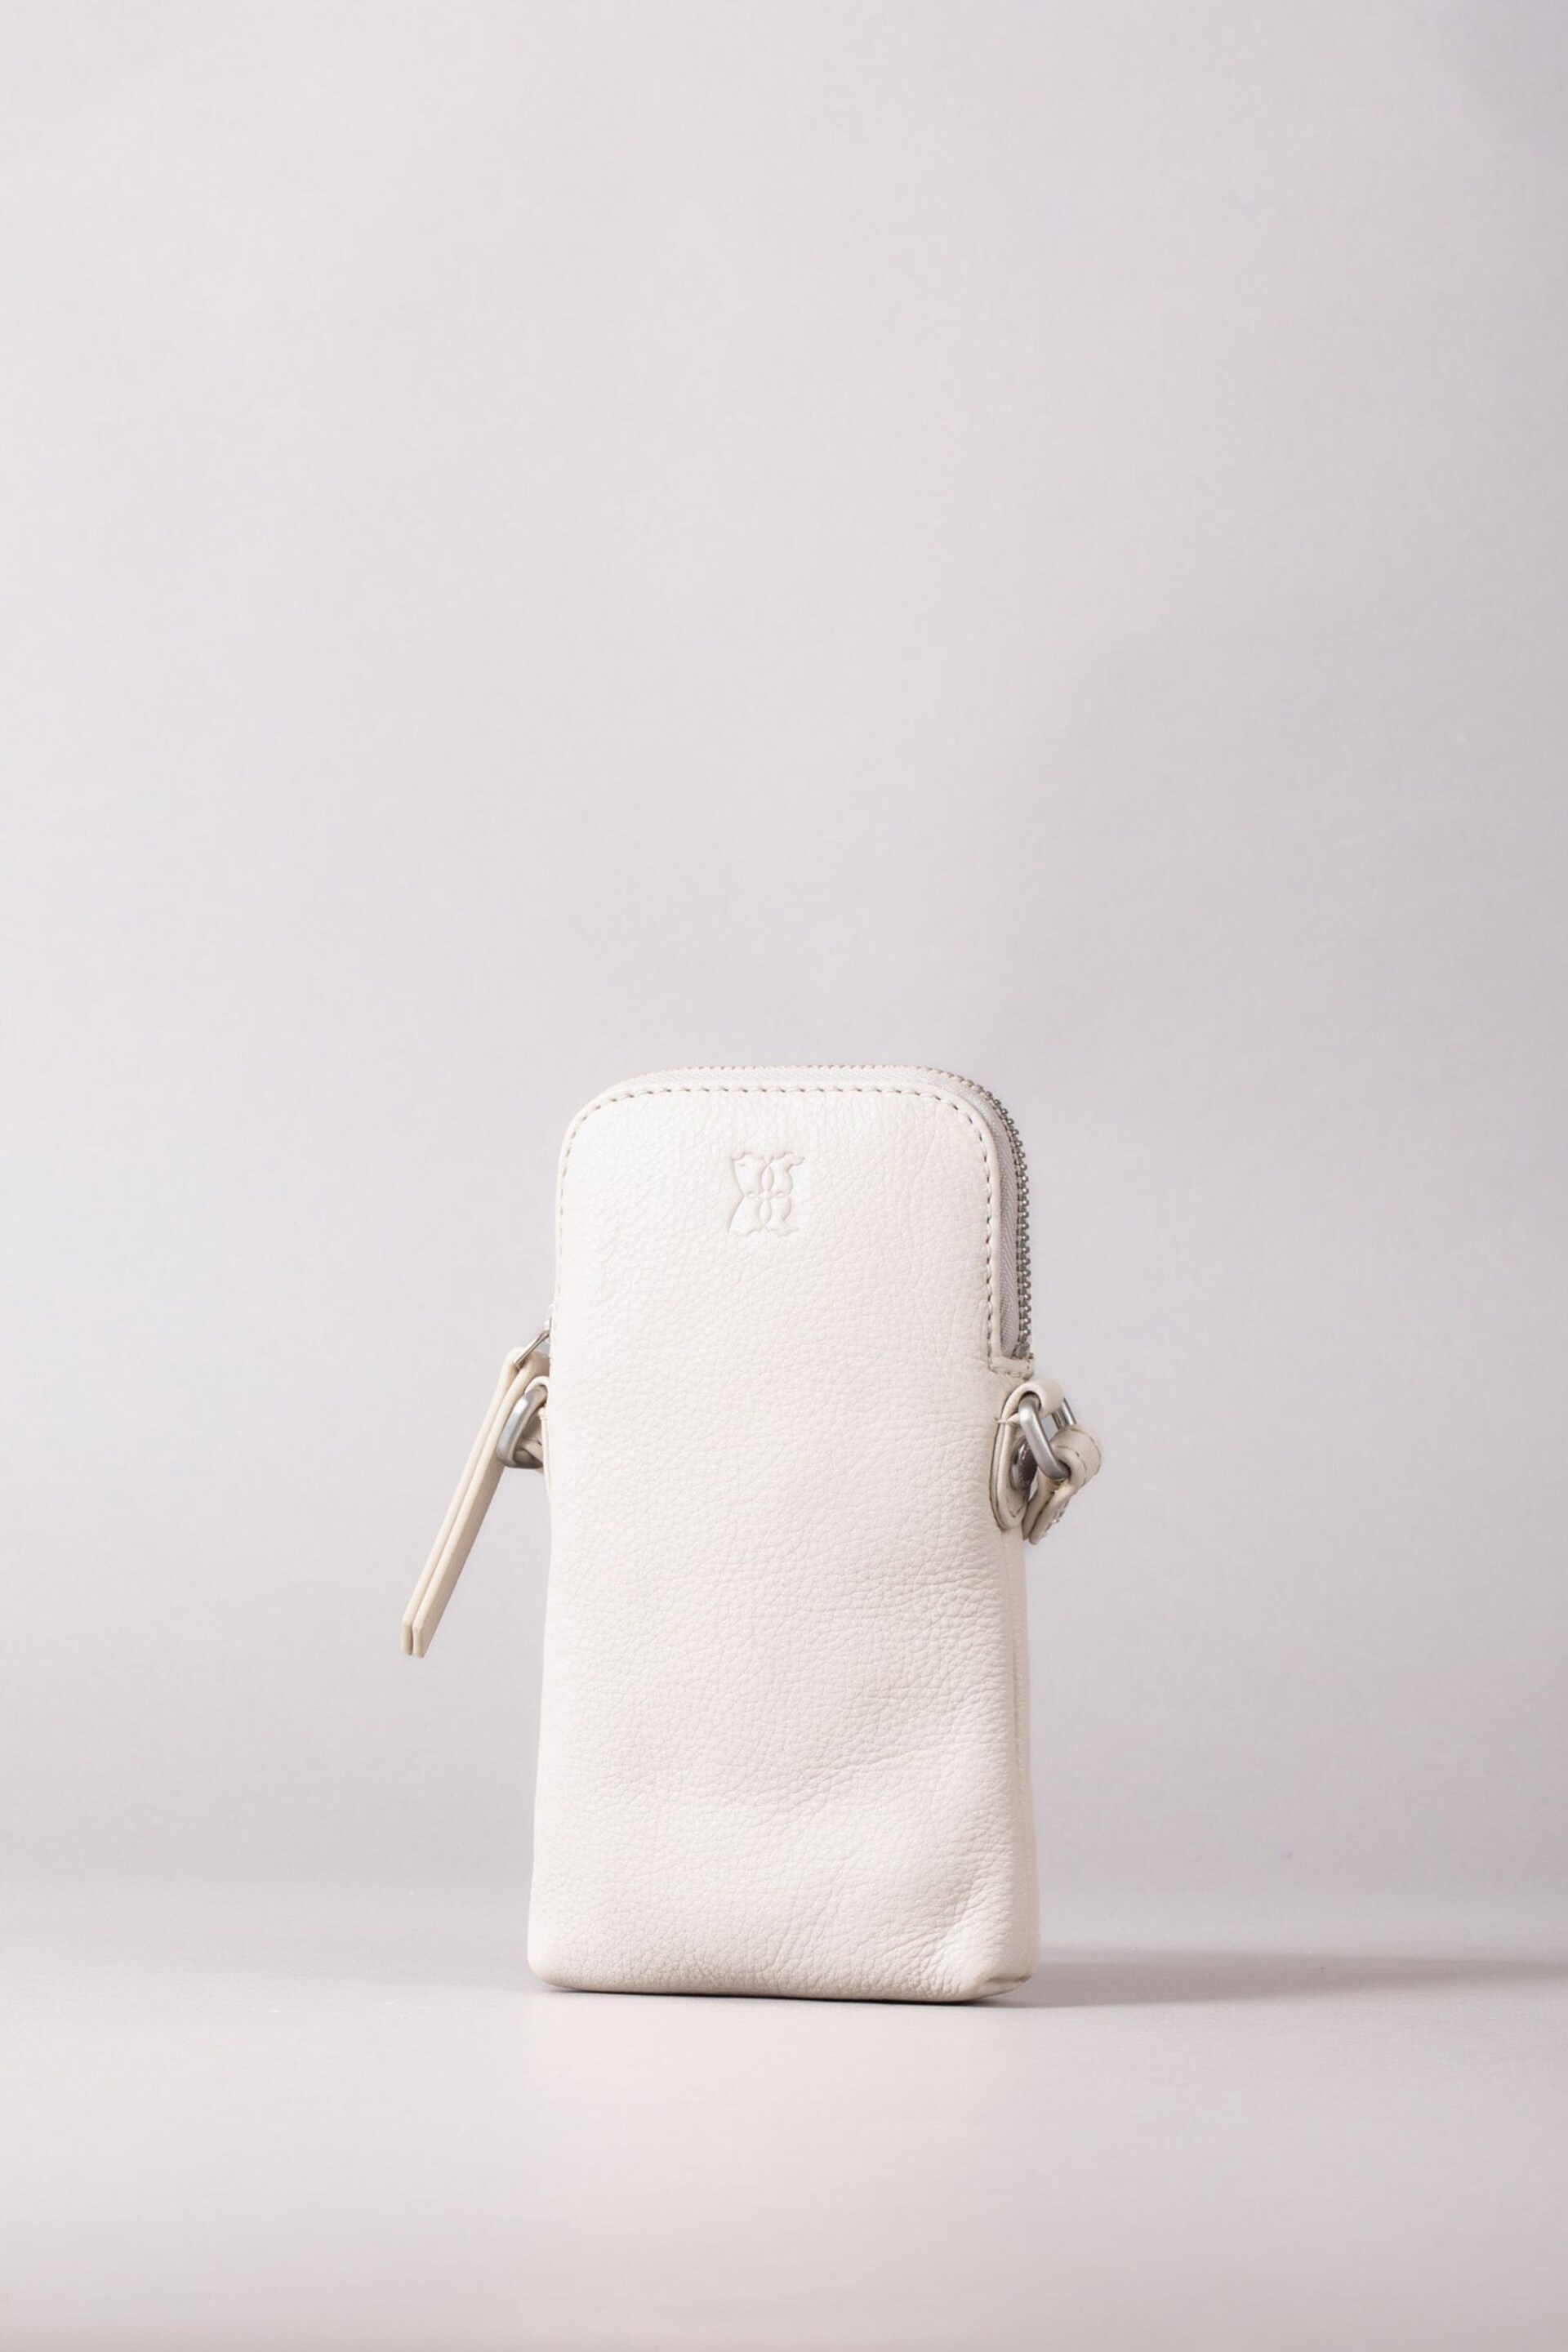 Lakeland Leather White Coniston Leather Cross-Body Phone Pouch - Image 2 of 6